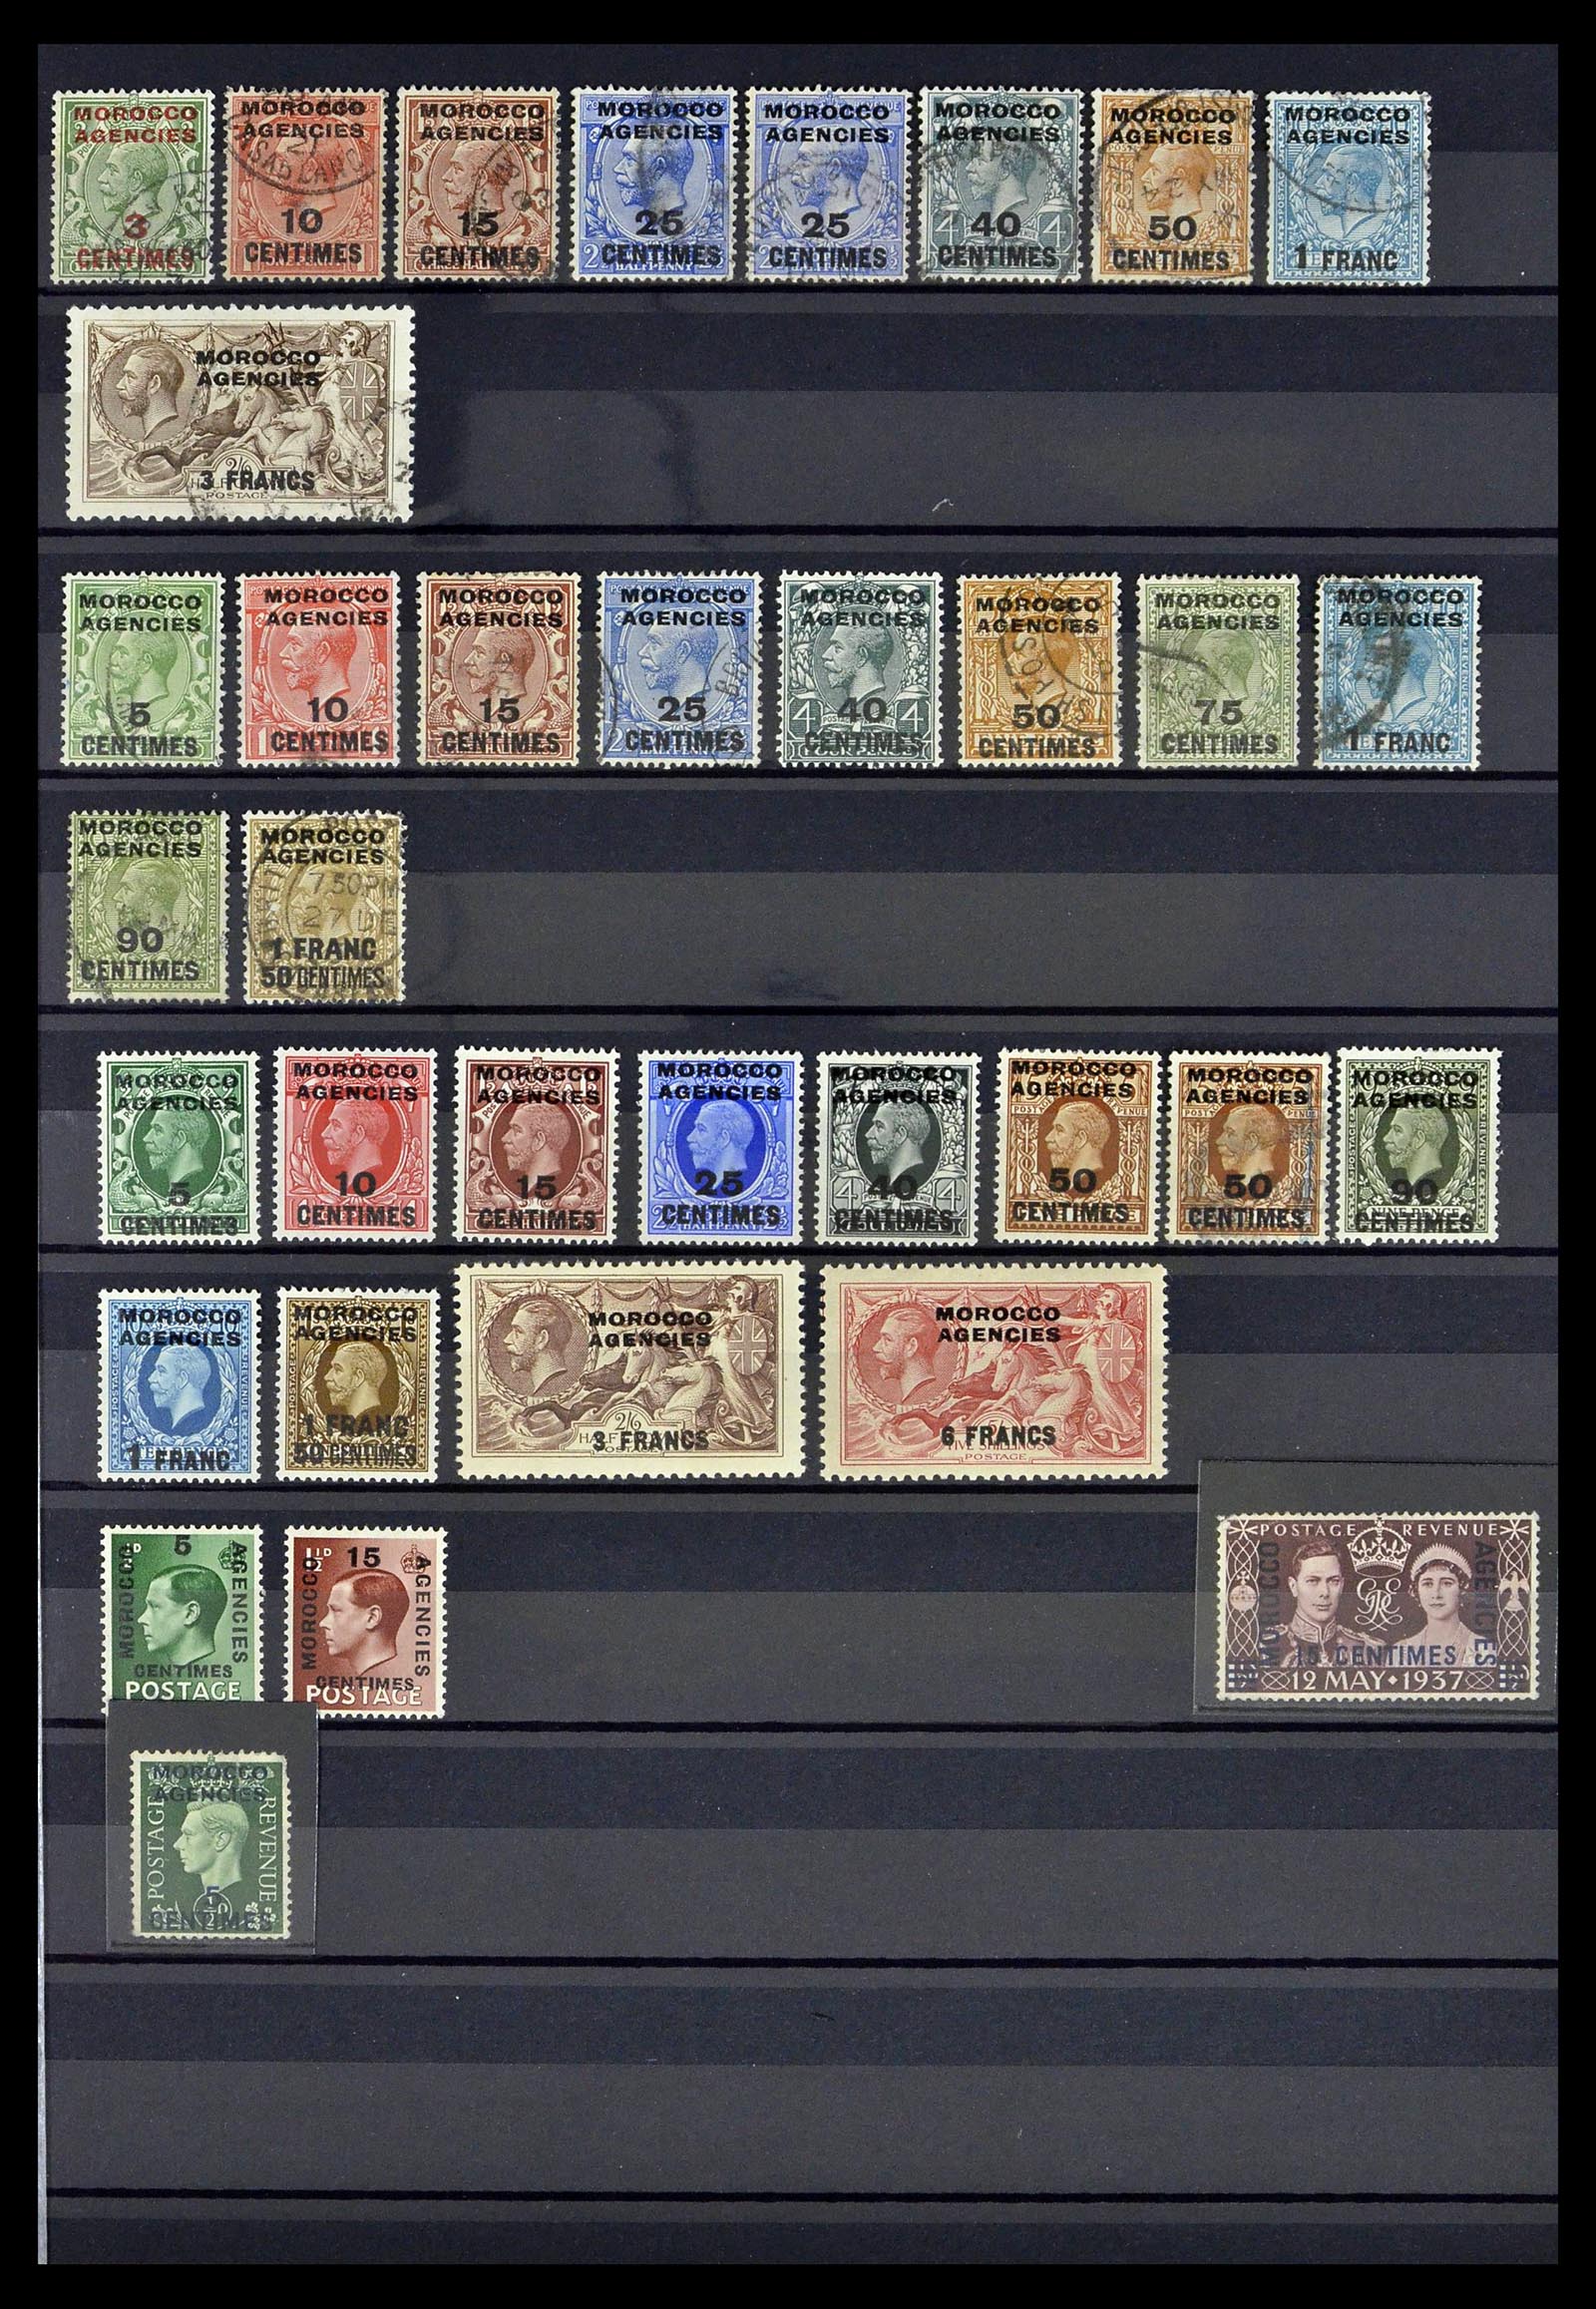 39409 0005 - Stamp collection 39409 British offices abroad 1885-1957.